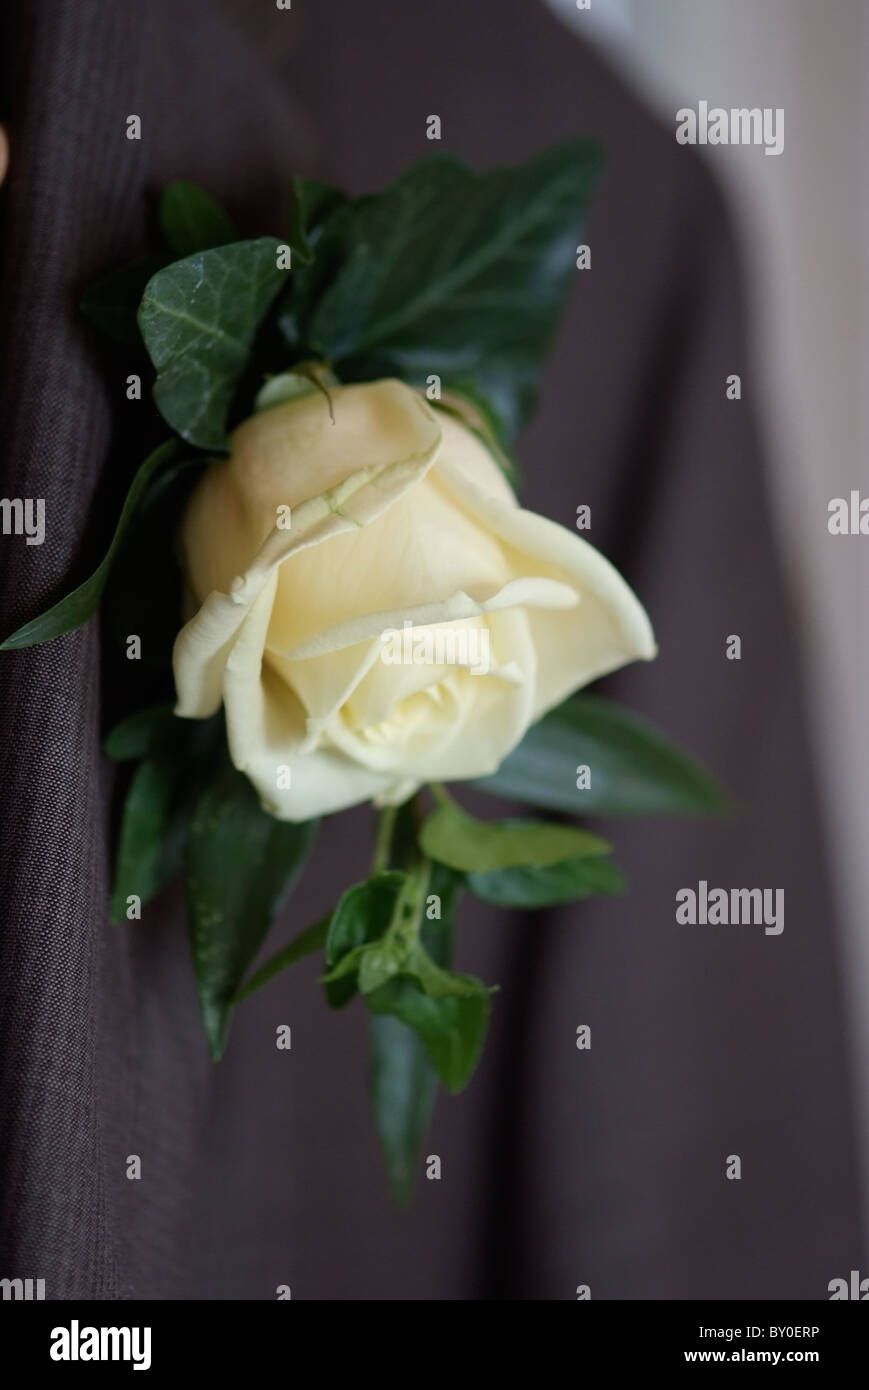 A white rose on the wedding suit of the groom Stock Photo